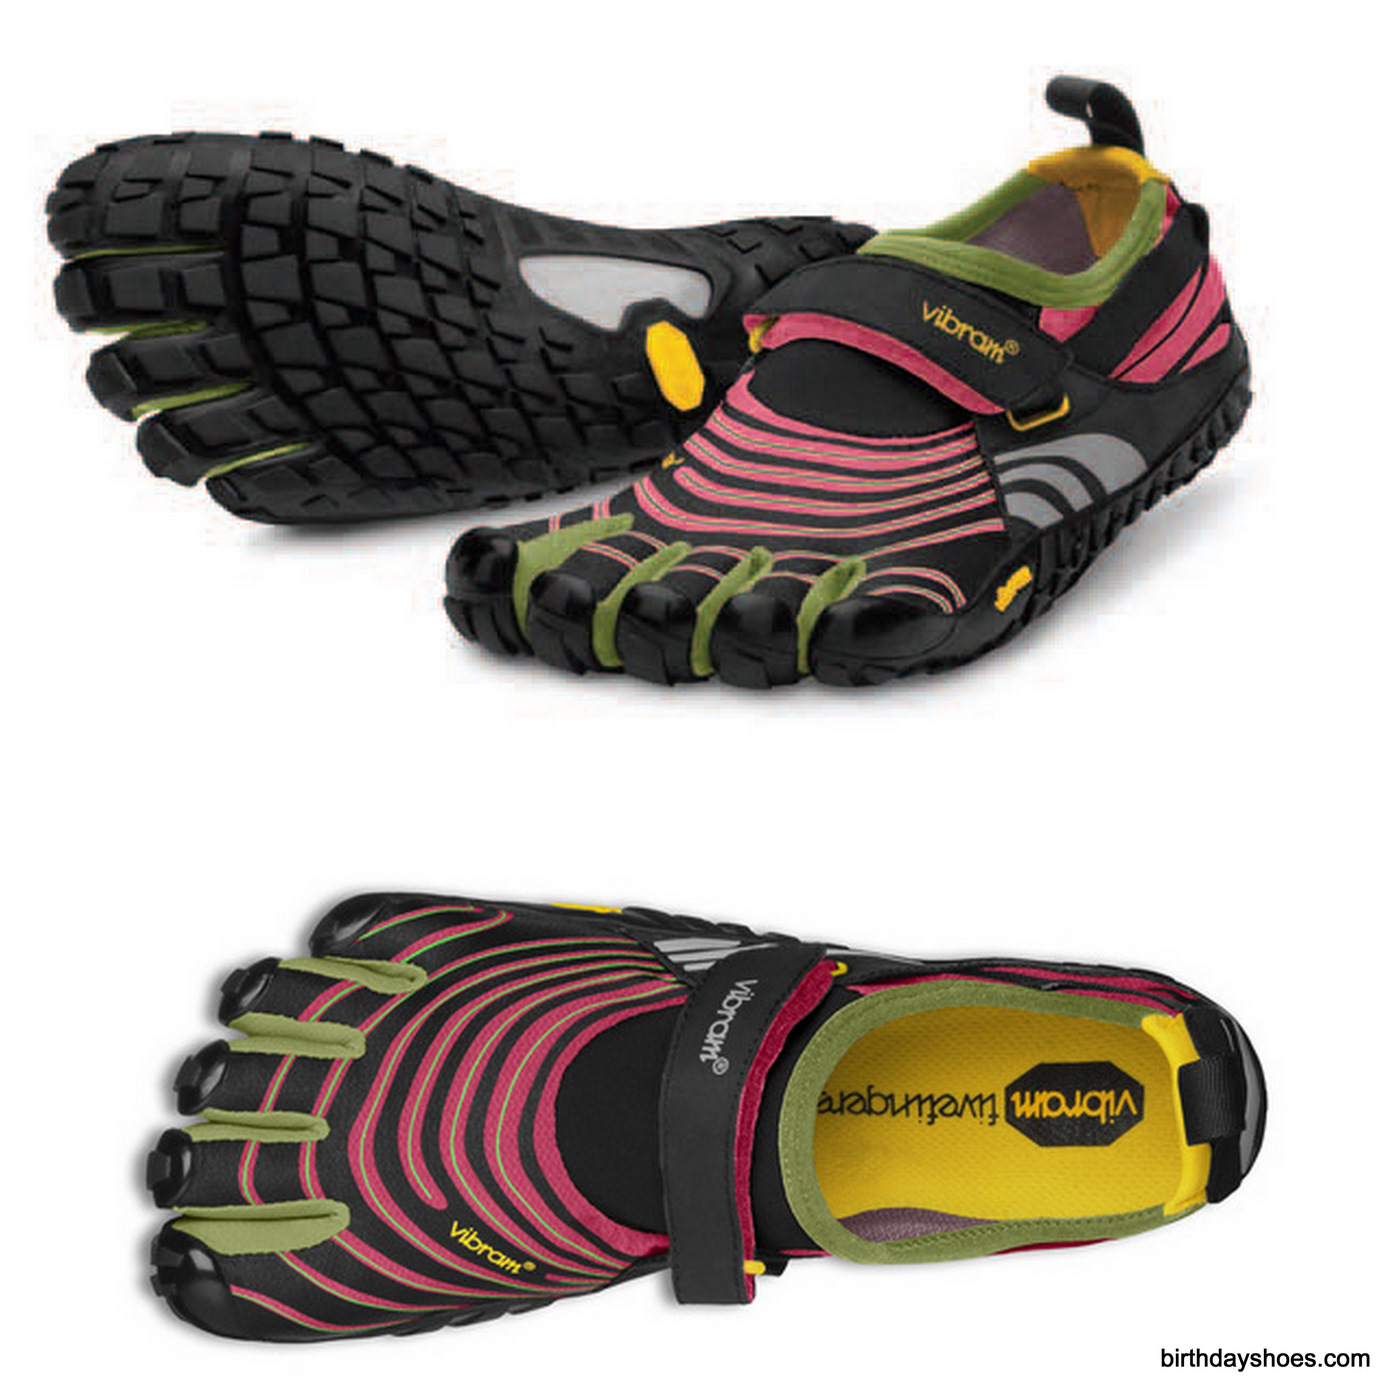 A new women's colorway of the upcoming Fall 2012 Spyridon FiveFingers.